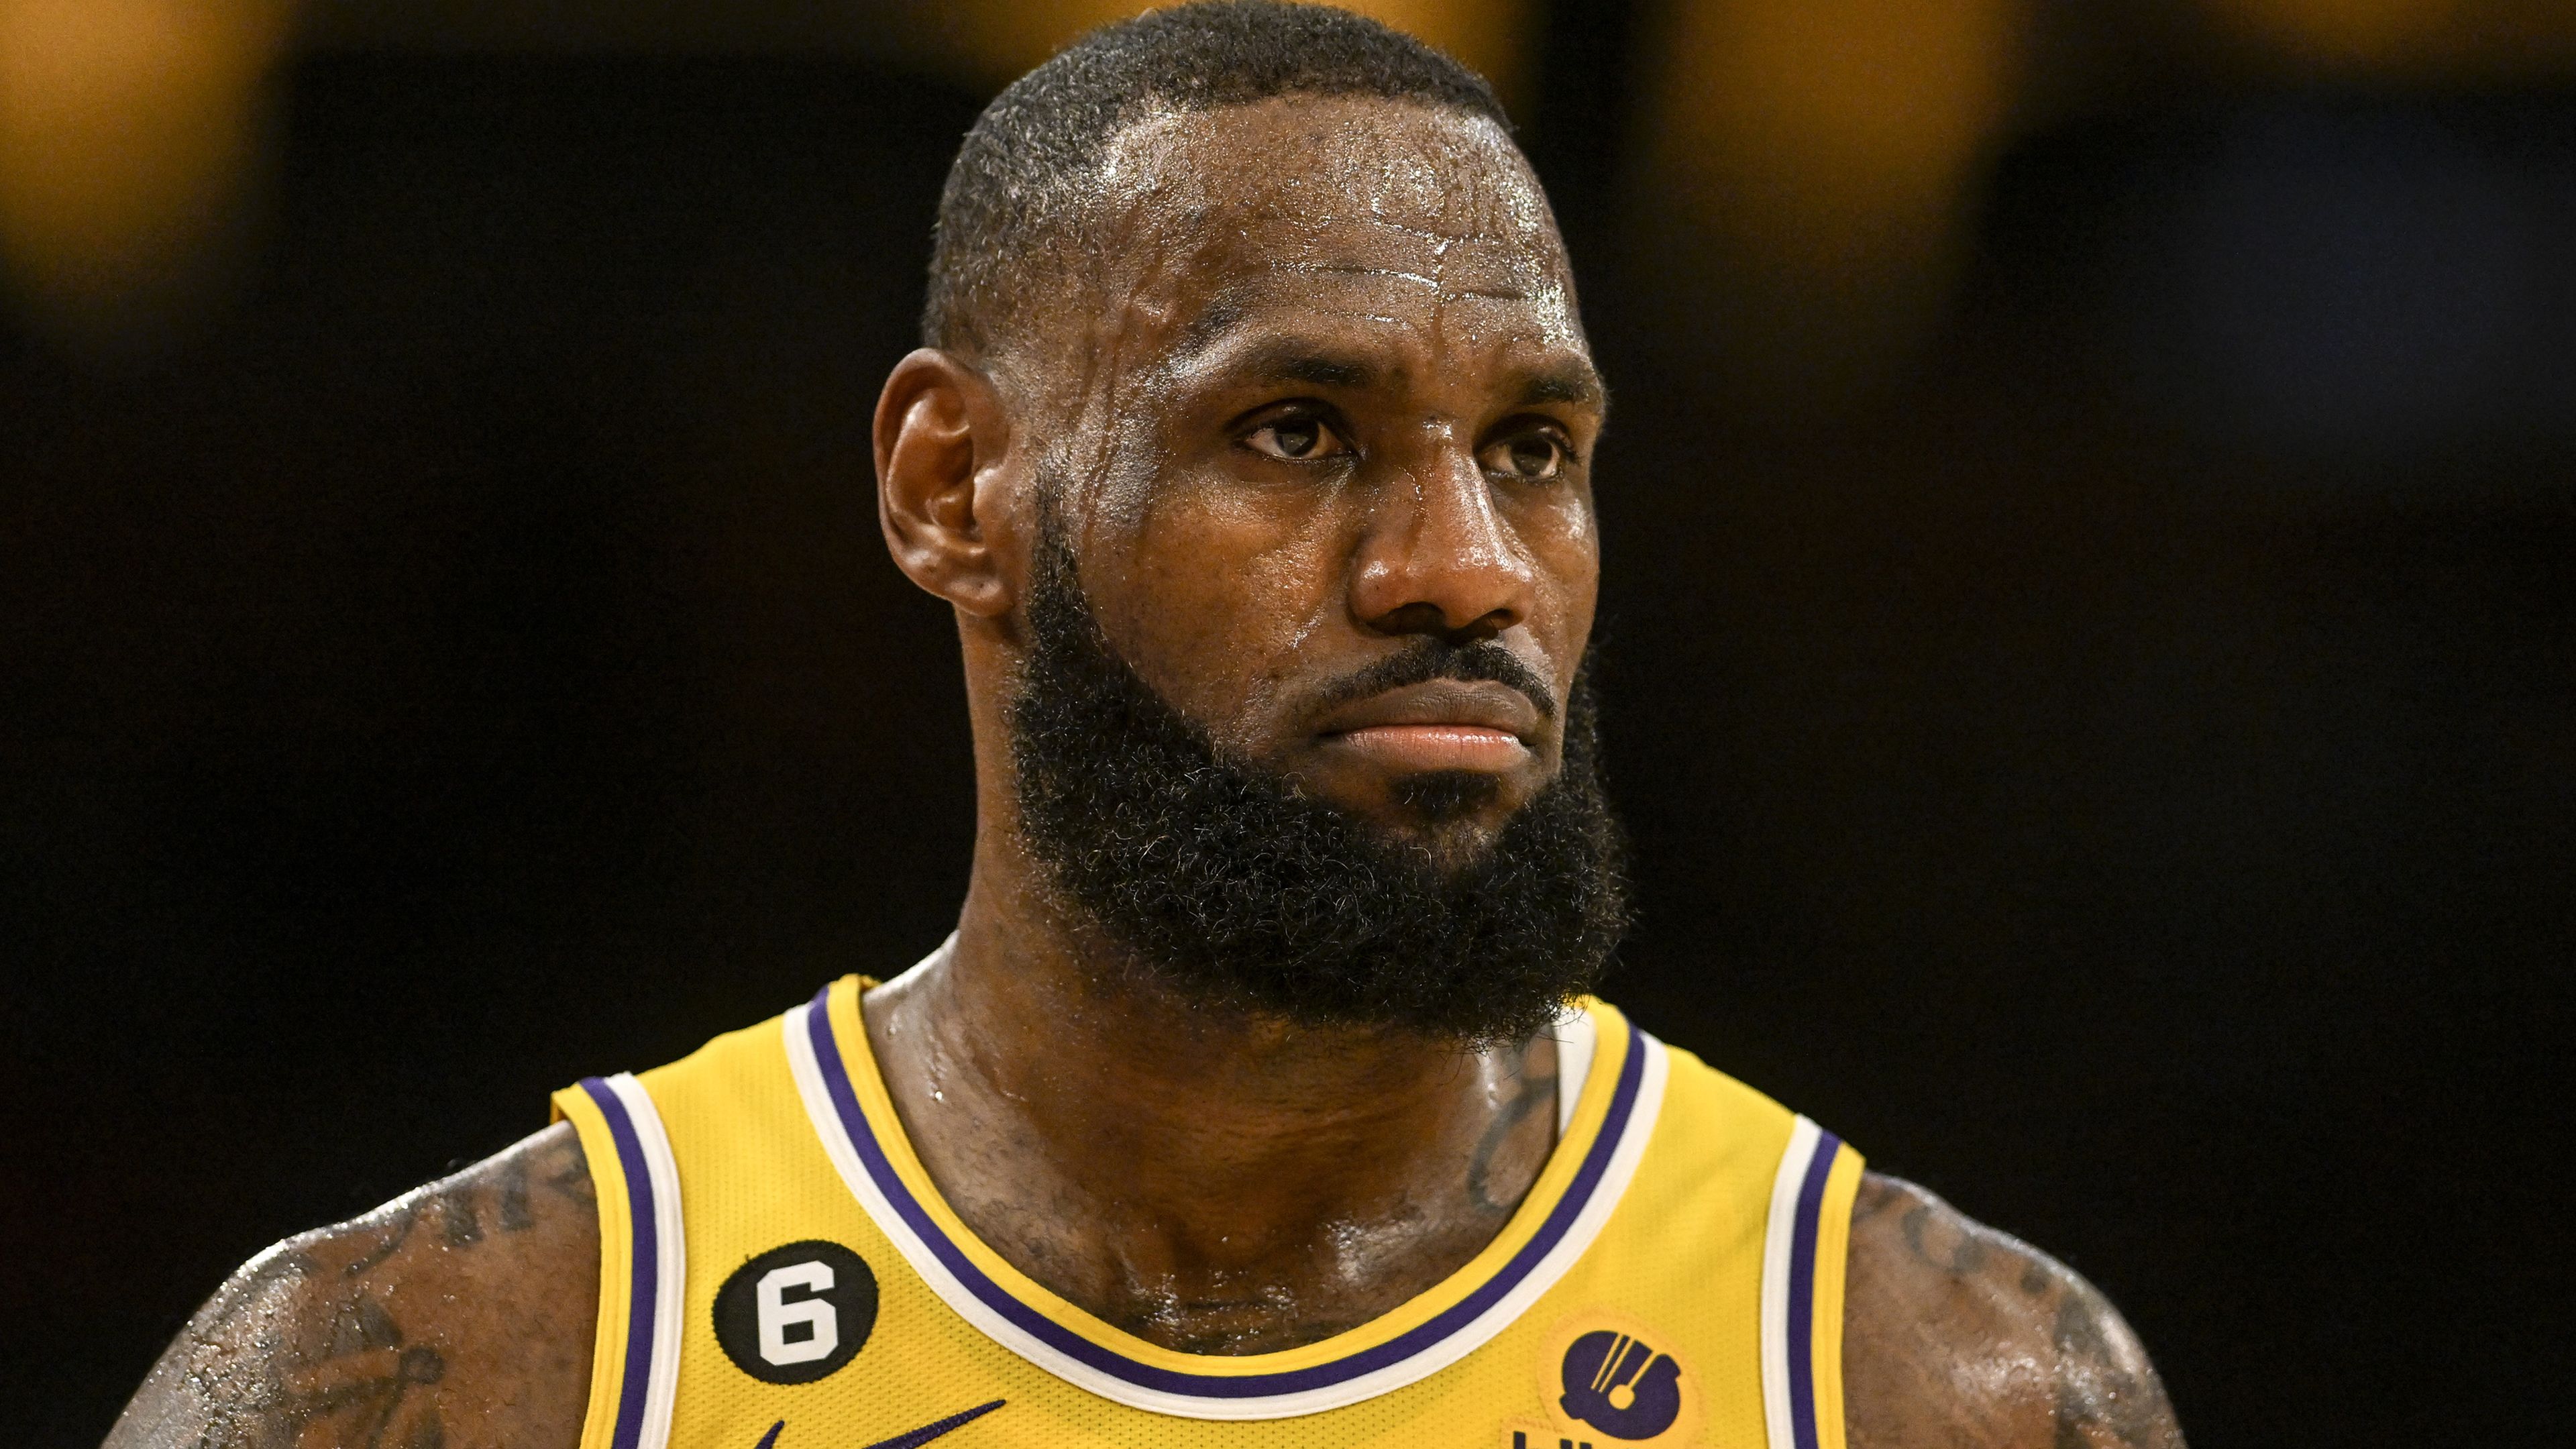 'I've got a lot to think about': LeBron James teases retirement after all-time performance results in loss